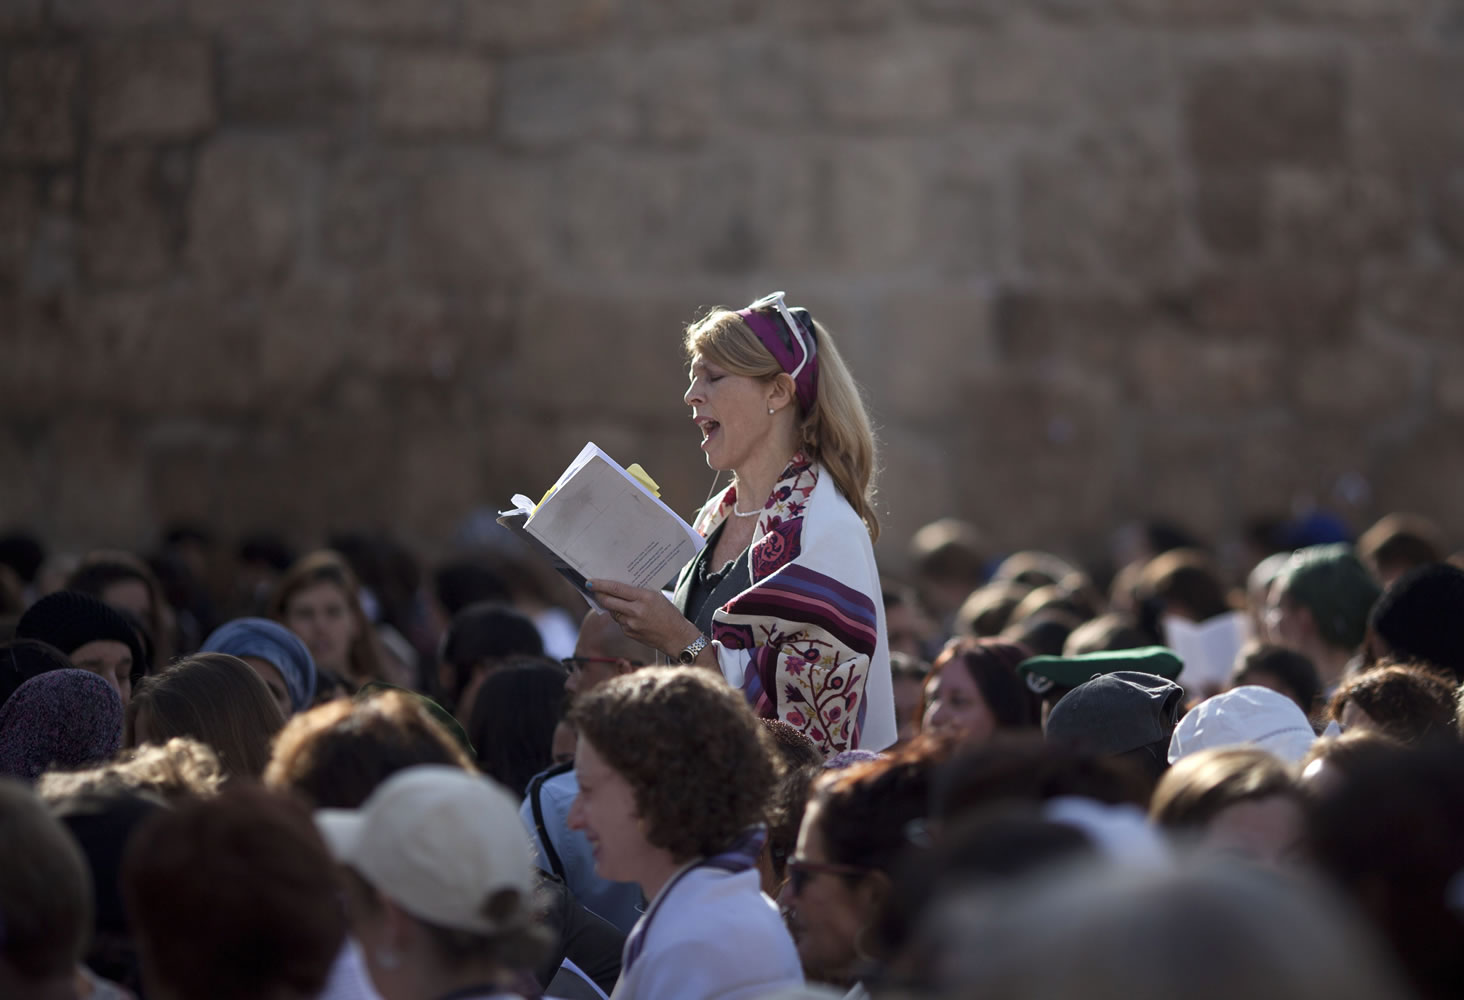 A Jewish woman prays at the Western Wall in Jerusalem&#039;s Old City. Israeli Prime Minister Benjamin Netanyahu is advancing a plan to allow non-Orthodox Jewish prayer at the Western Wall, a move advocates say would mark government support for liberal streams of Judaism.